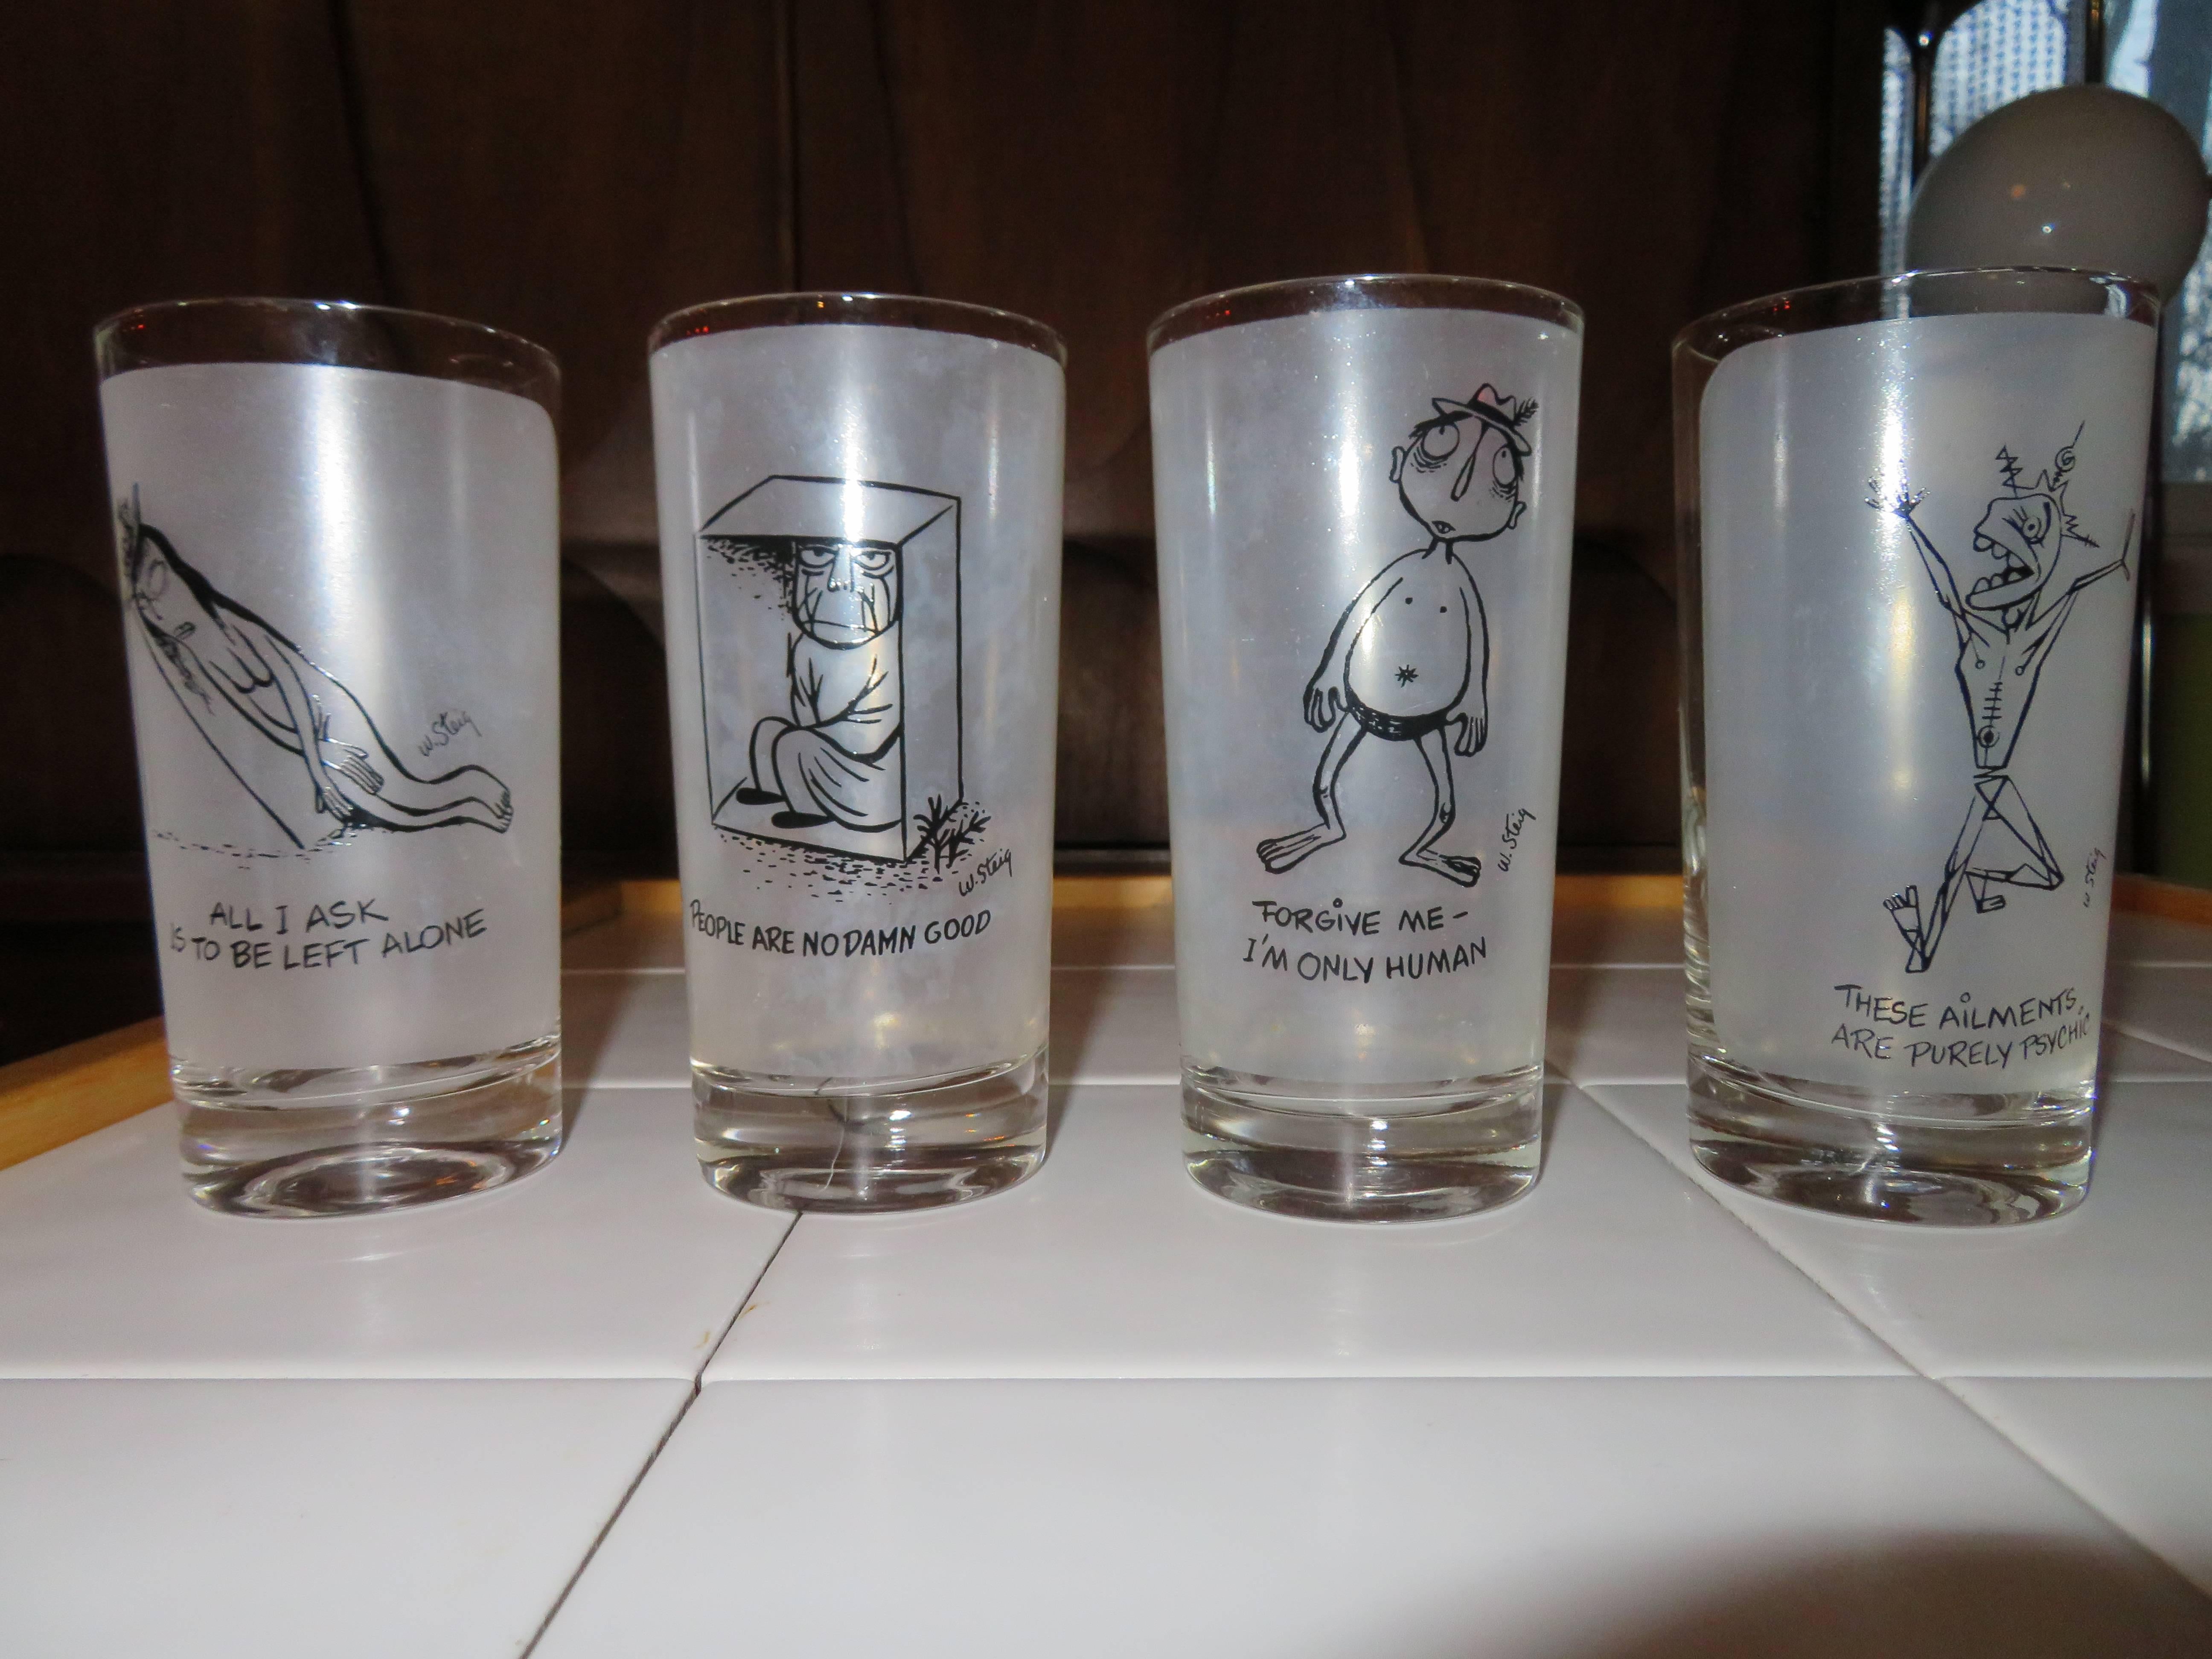 Set of eight vintage highball glasses by William Steig. William Steig created his amusing collection of dysfunctions, The Lonely Ones, in 1942. The popularity of the book inspired these bar glasses, which are most likely, circa 1950s. Steig is